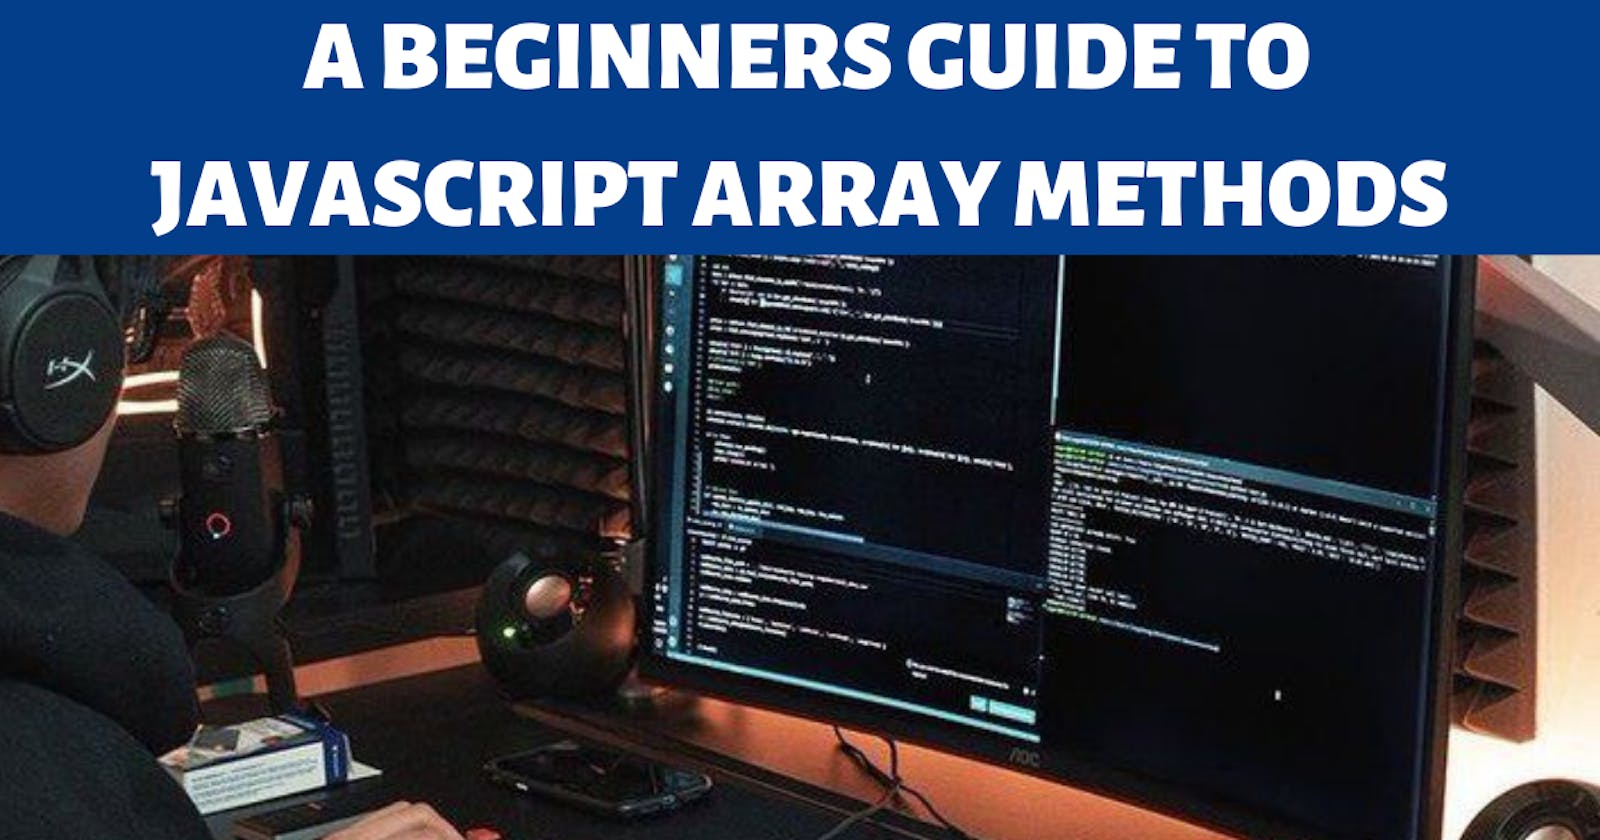 A Beginners Guide to Javascript Array Methods